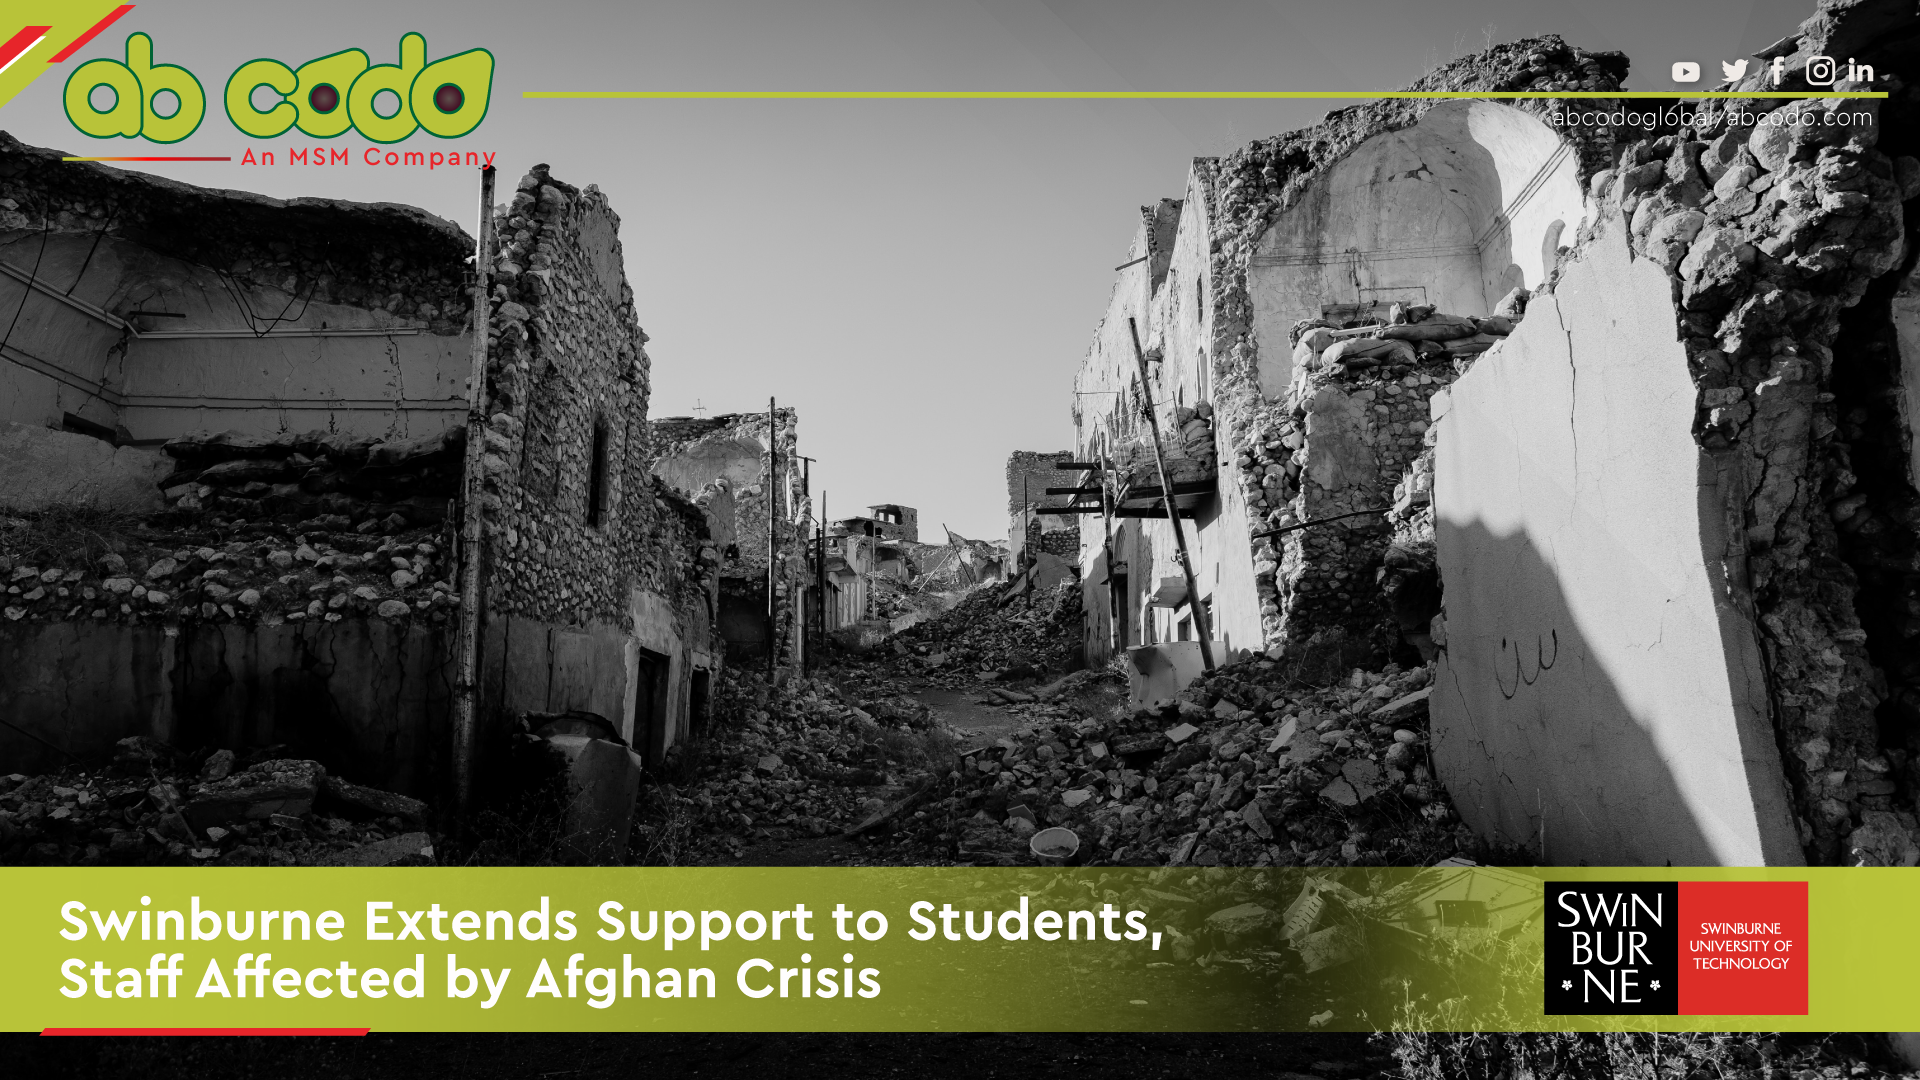 Swinburne Extends Support to Students, Staff Affected by Afghan Crisis